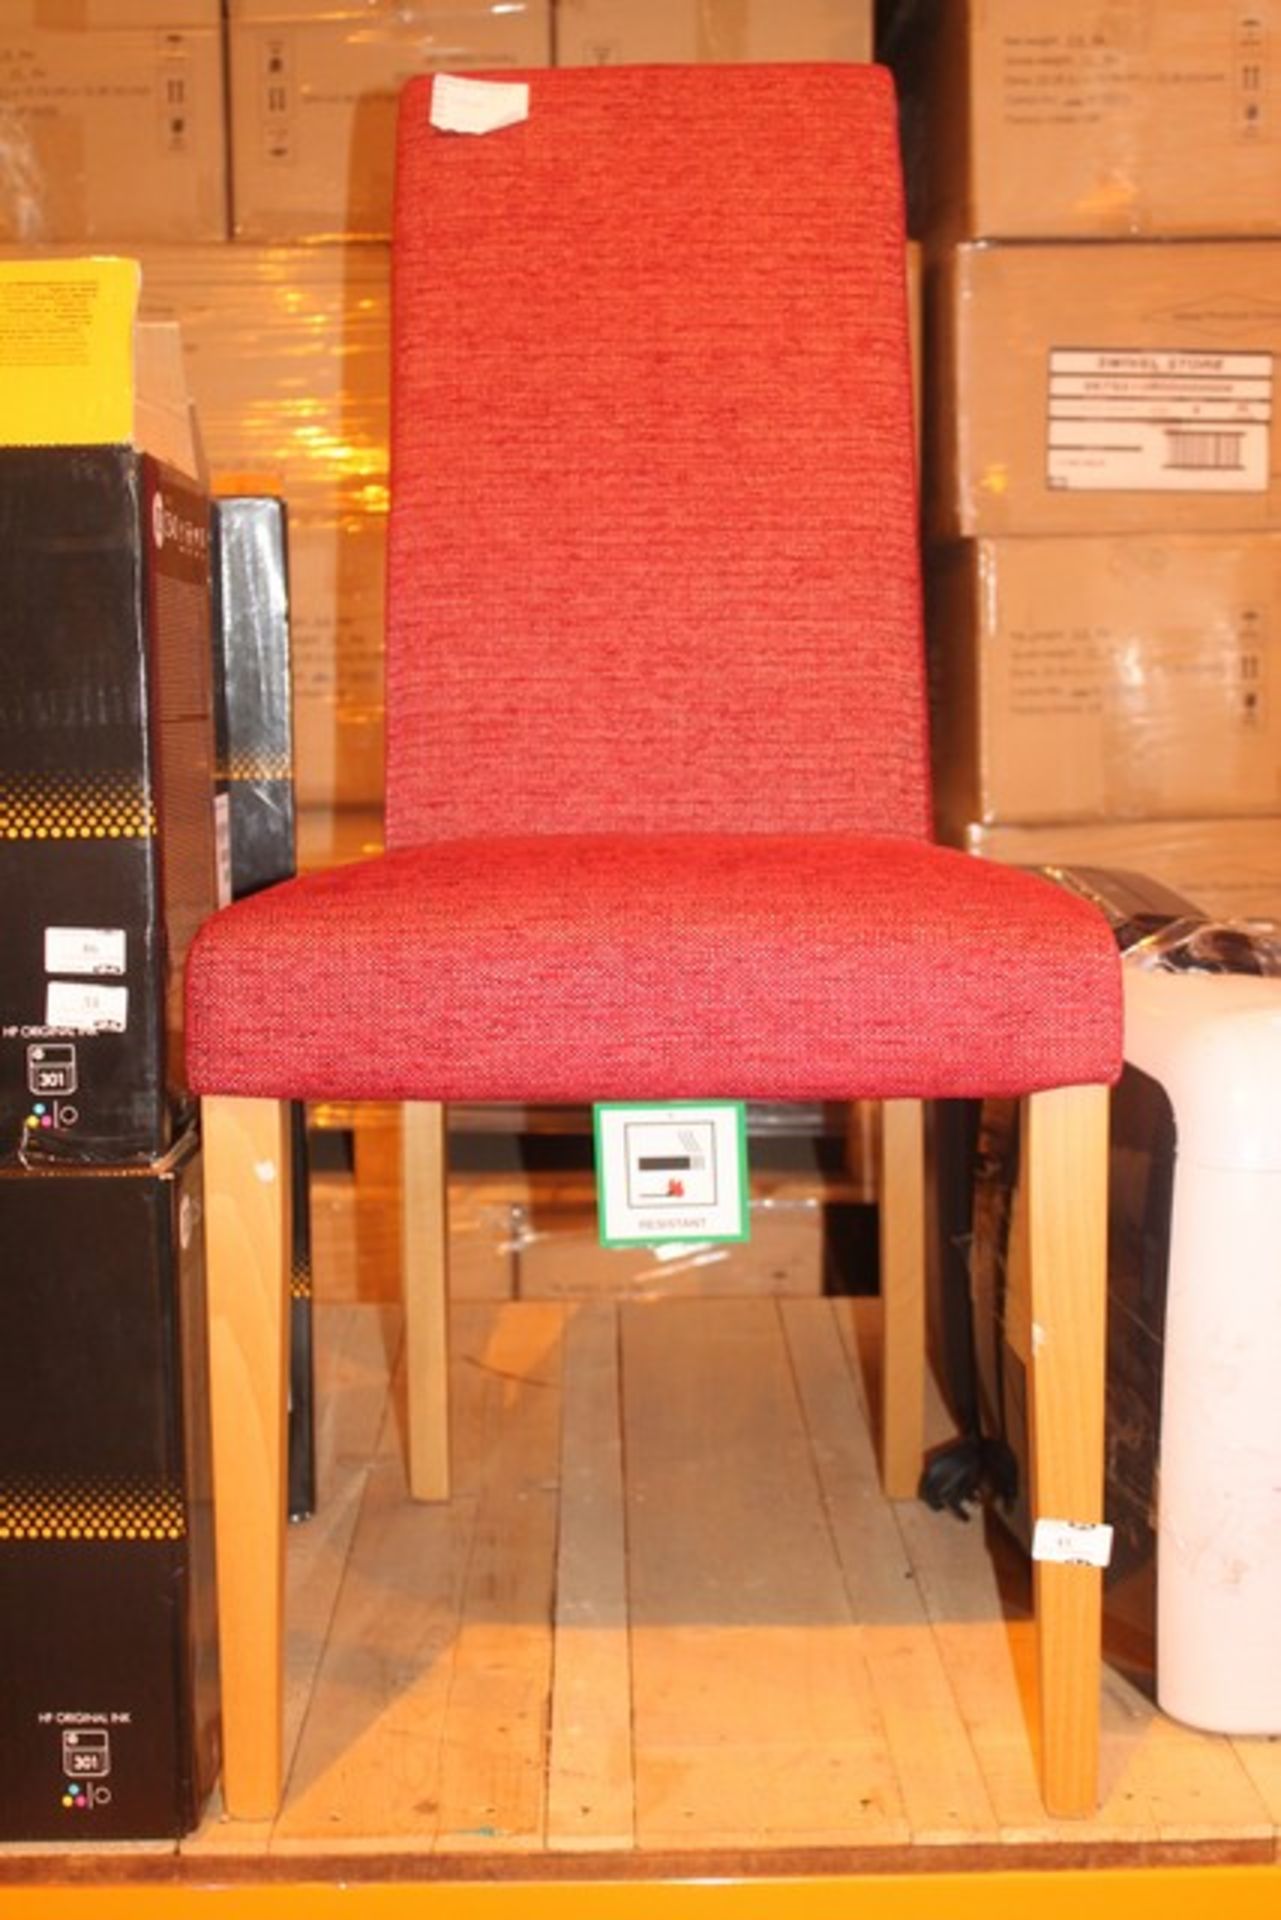 1 x RED FABRIC AND LIGHT OAK DINING CHAIR (3844) RRP 100   *PLEASE NOTE THAT THE BID PRICE IS